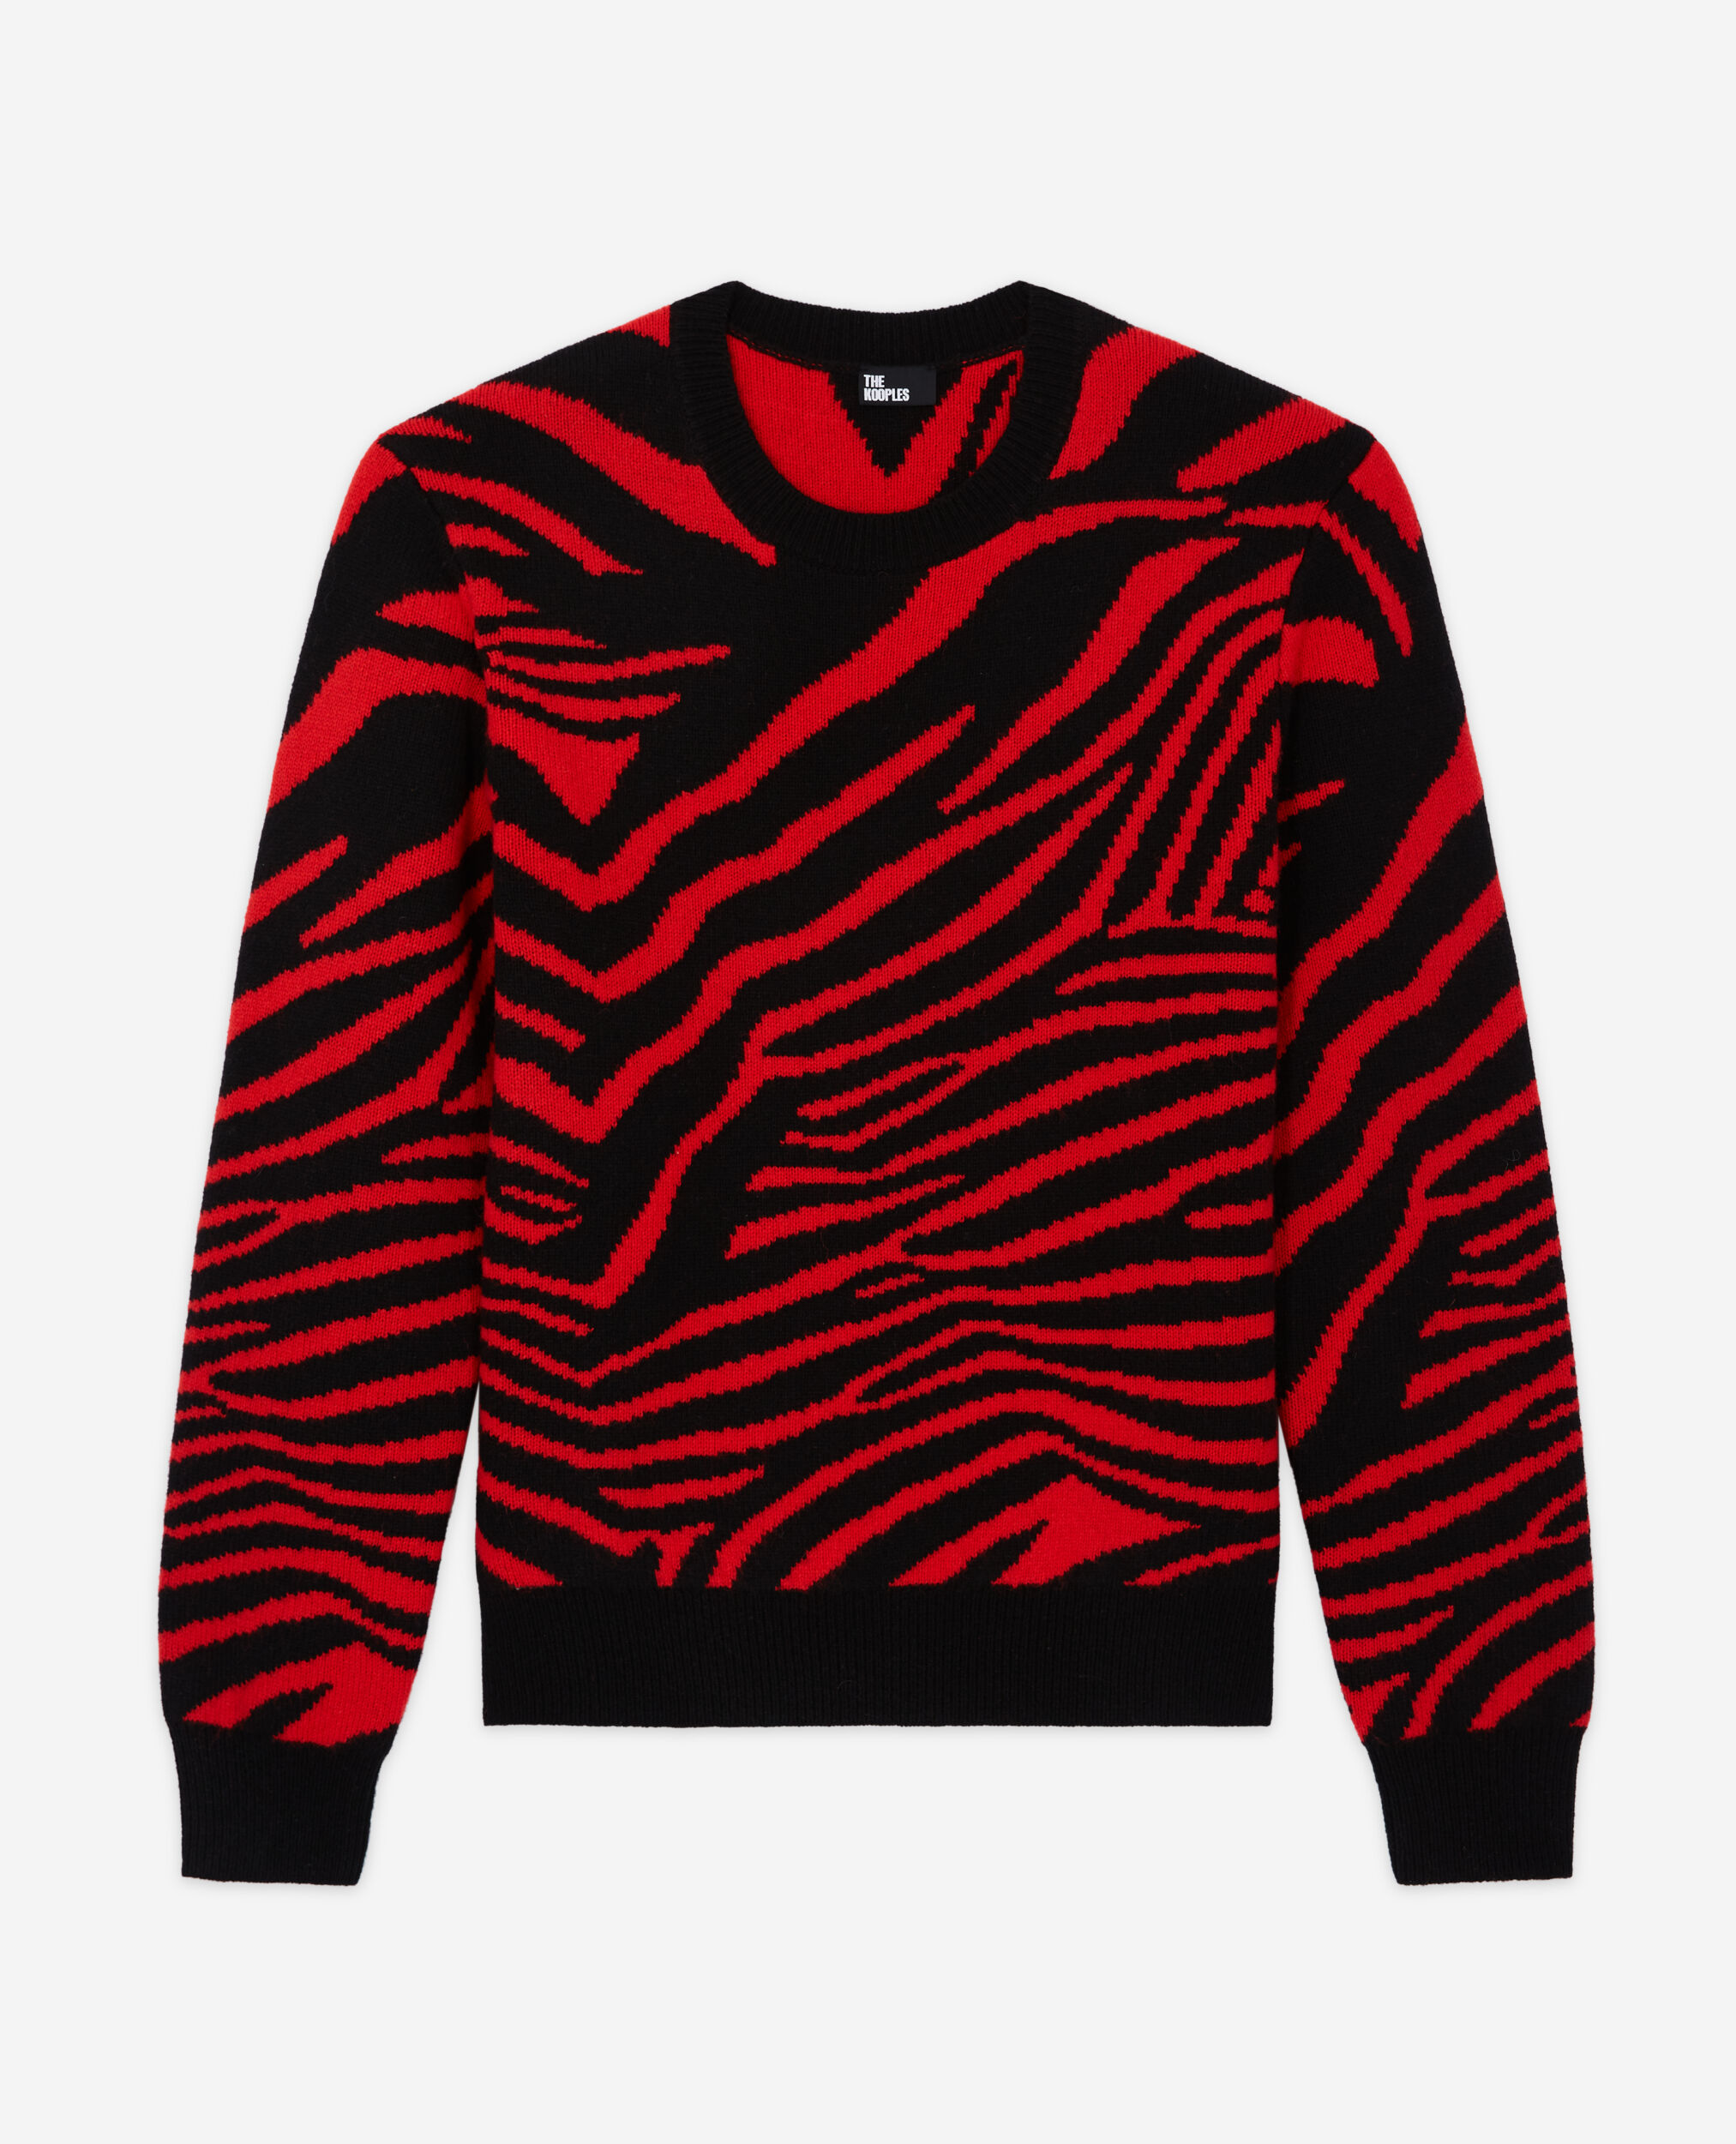 Roter Wollpullover mit Print, BLACK - RED, hi-res image number null